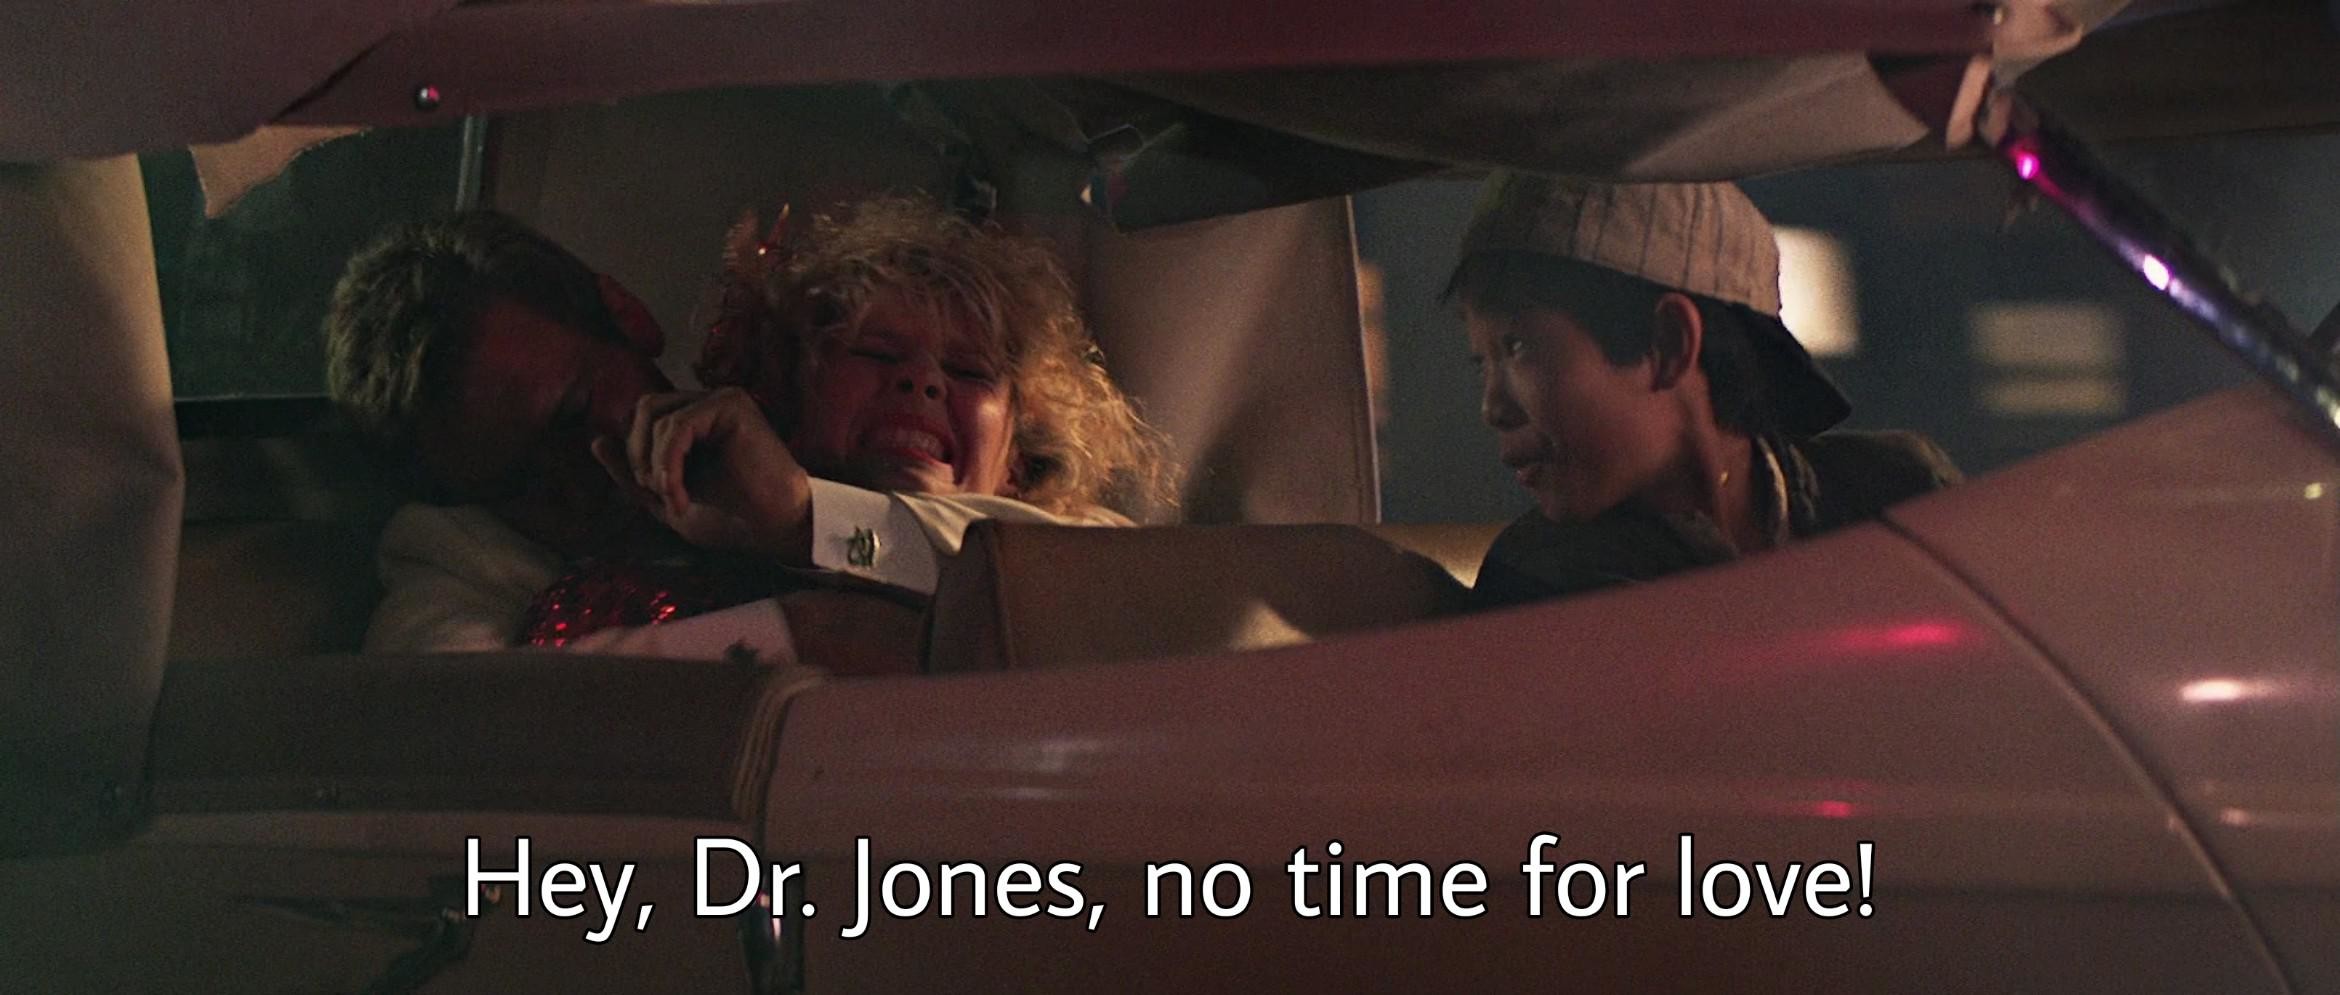 No time for love dr jones gif